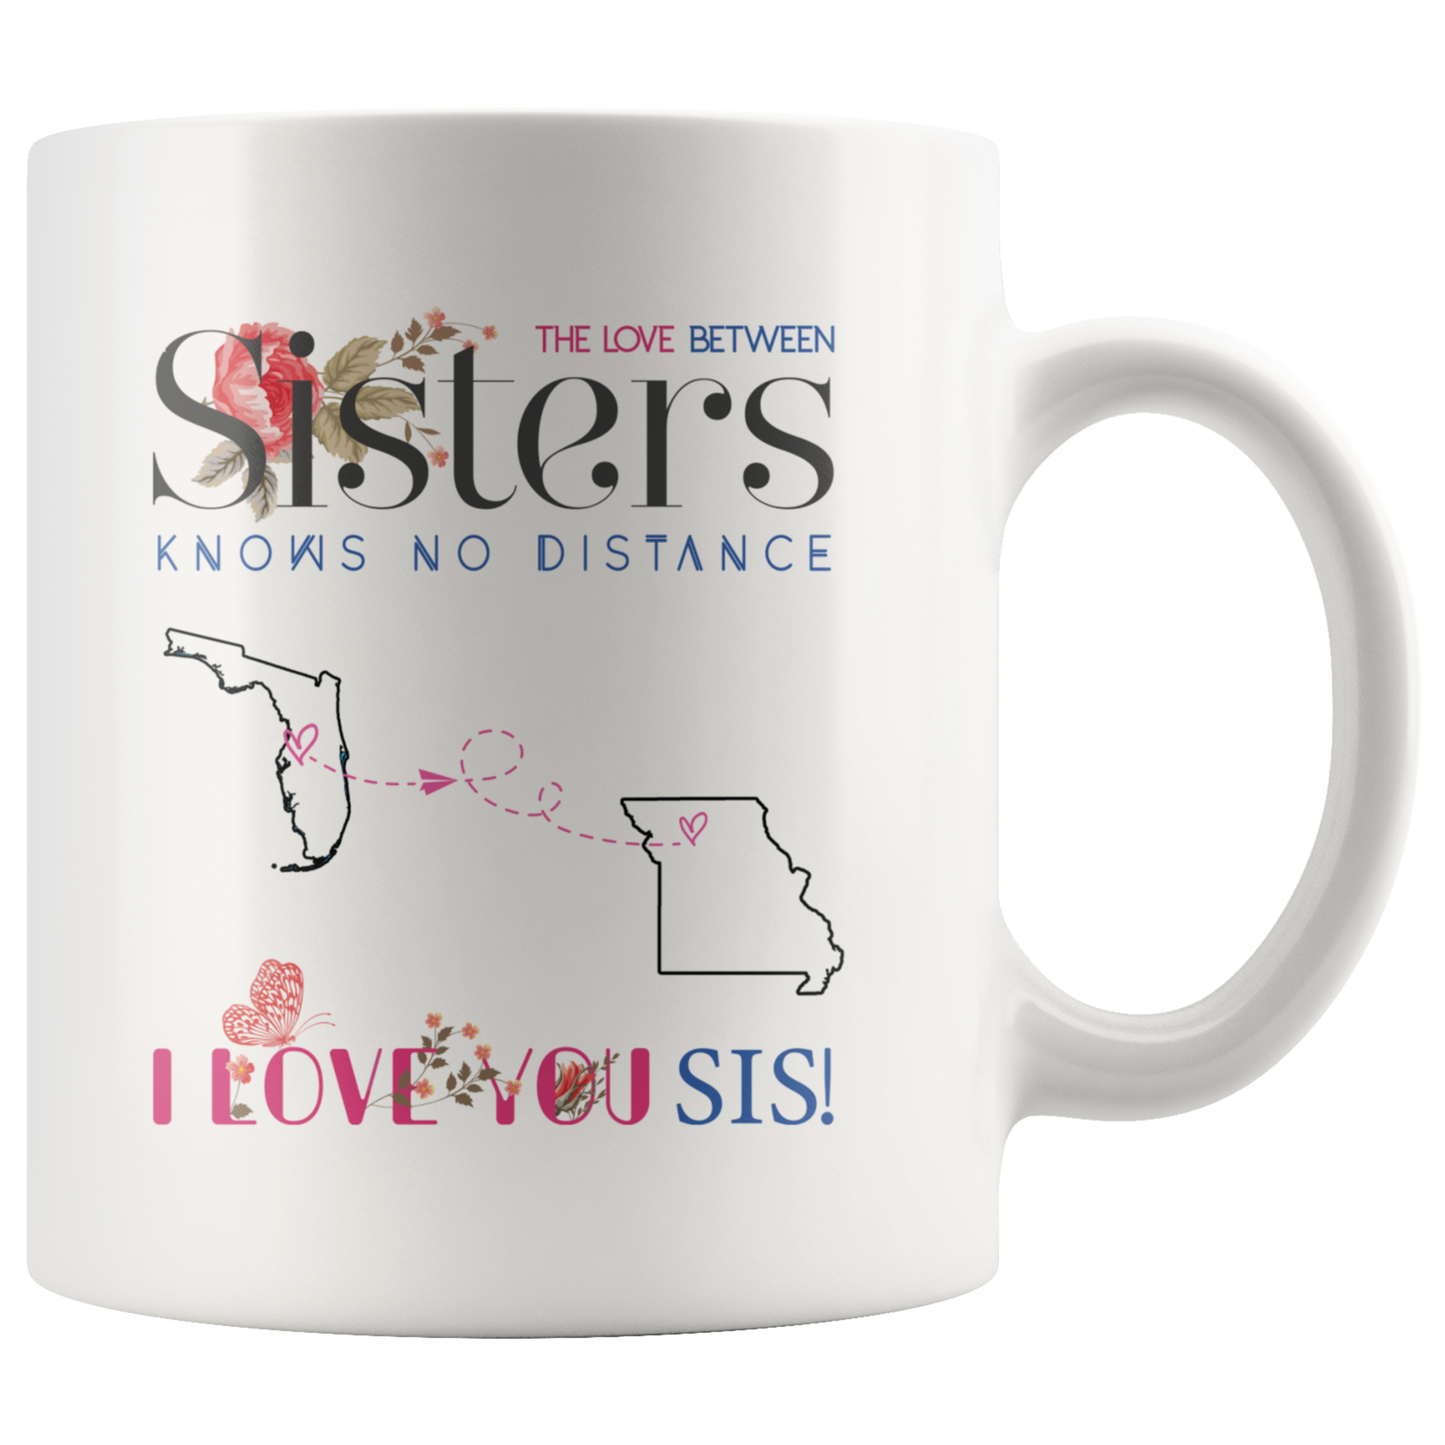 M-20519957-sp-22803 - Long Distance Relationship Gift - The Love Between Sisters K